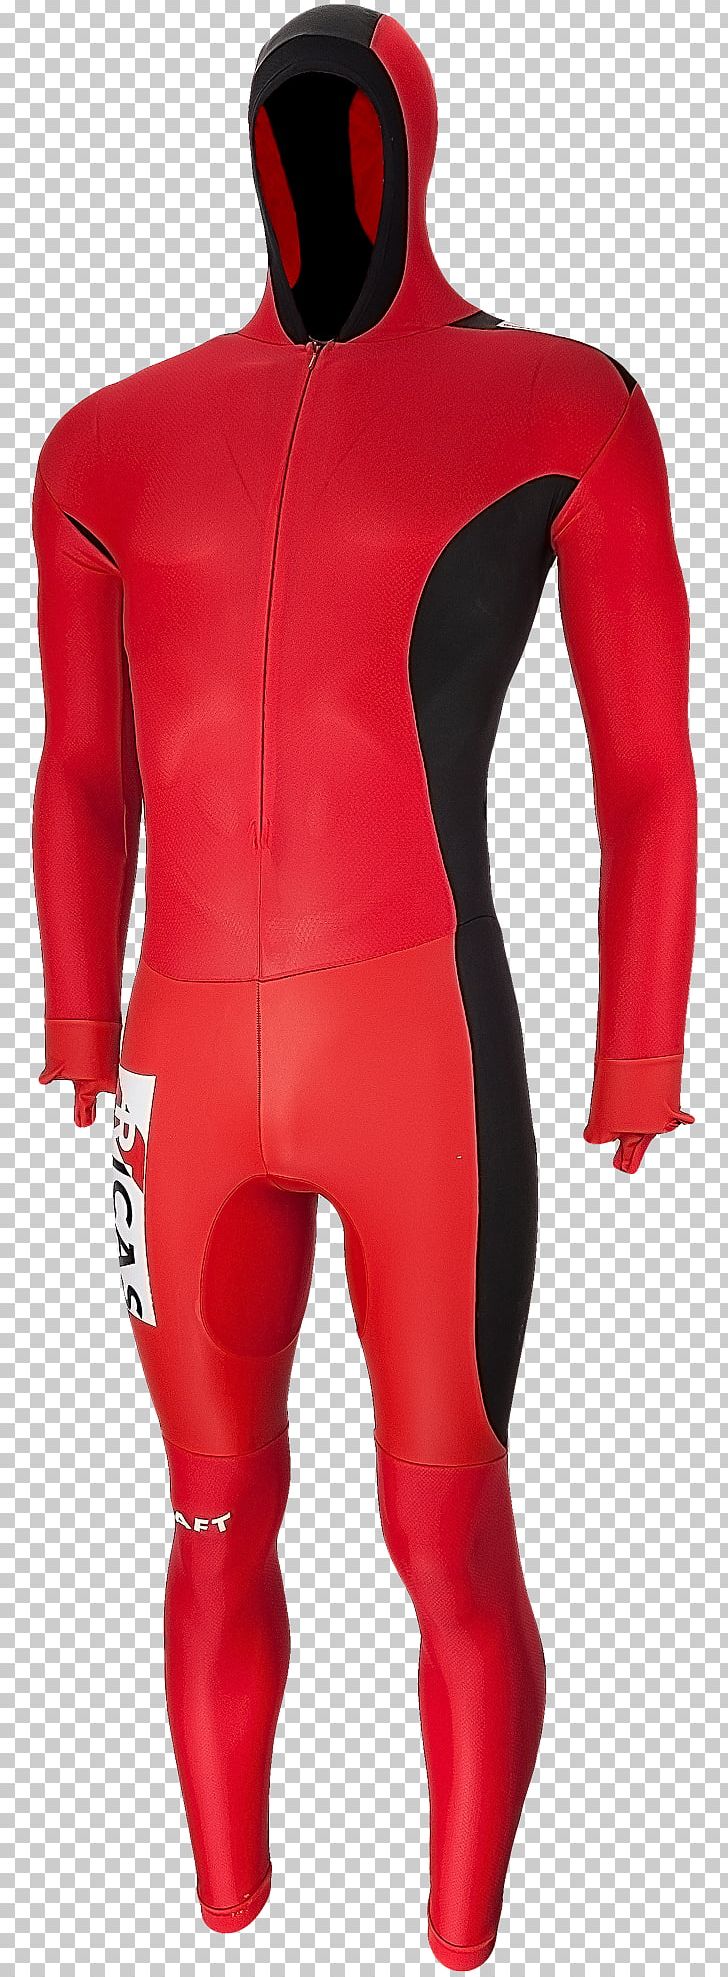 Schaatspak Clothing Ice Skating Wetsuit Product PNG, Clipart, Character, Clothing, Fiction, Fictional Character, Ice Skating Free PNG Download